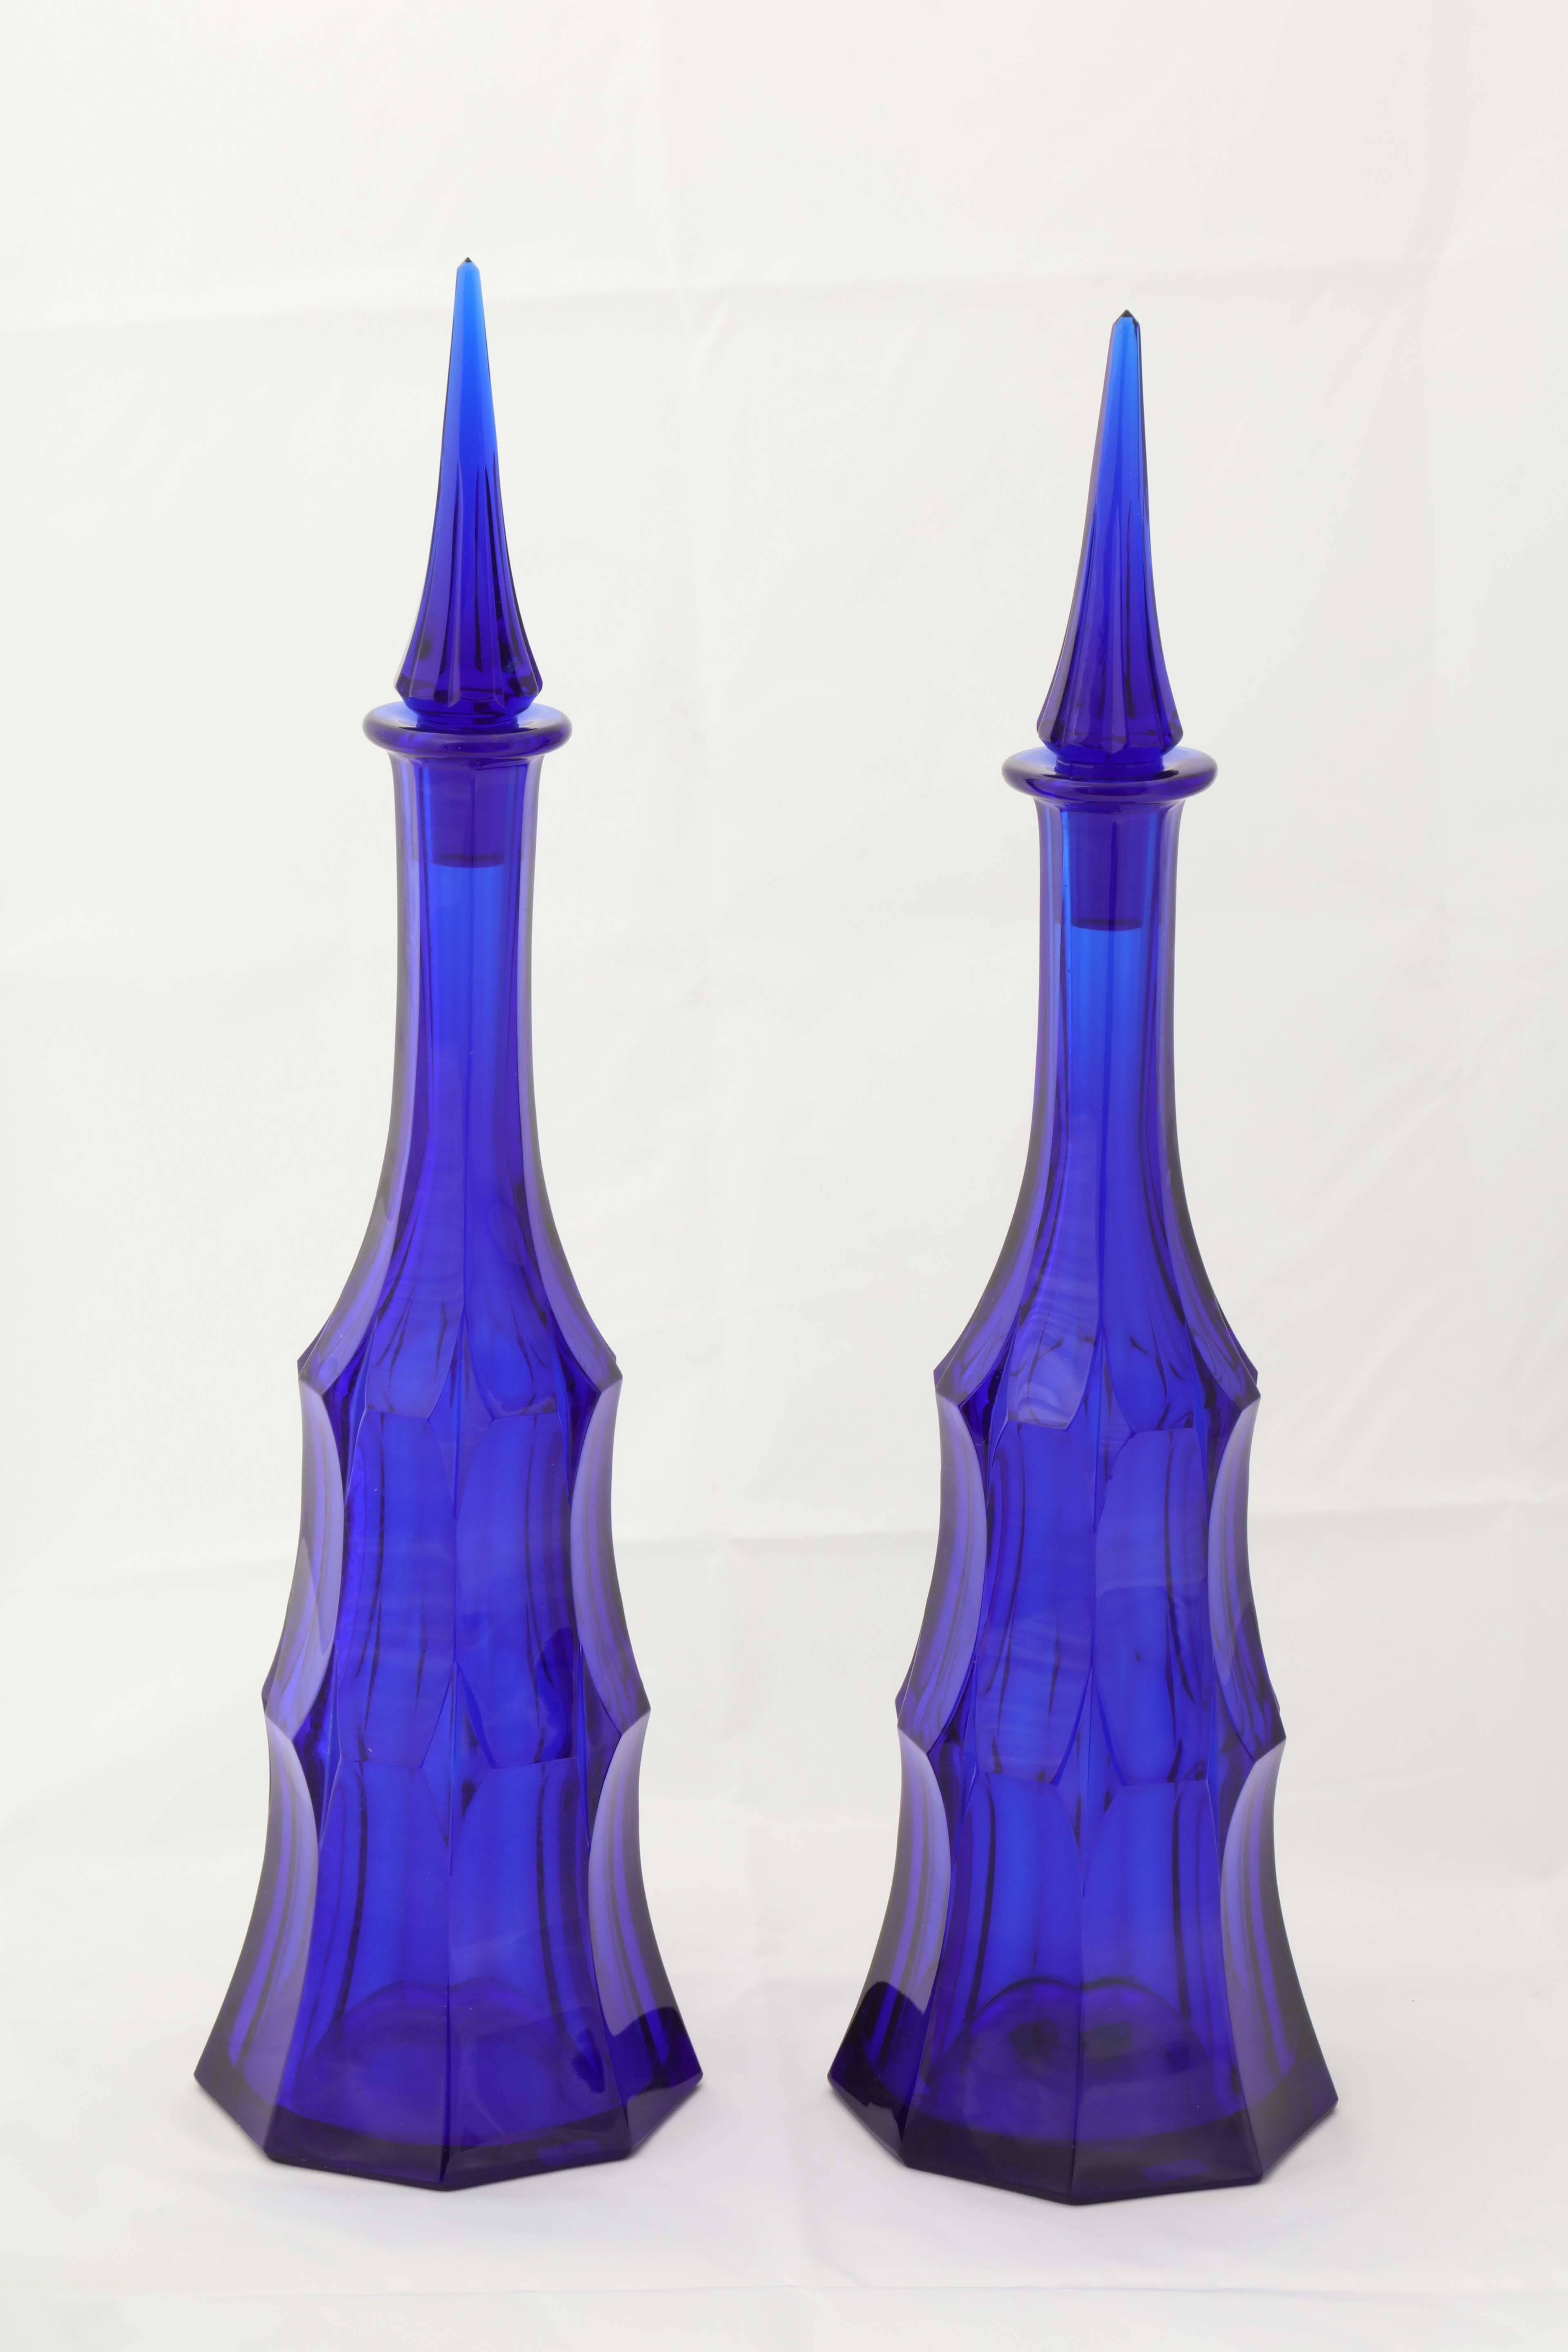 A pair of cobalt blue wheel carved decanters by Moser, circa 1918. 
Etched made in Czechoslovakia, Moser, Karlsbad, mint condition.
One decanter 17.5 inches high, the other 17.88 inches high.
 